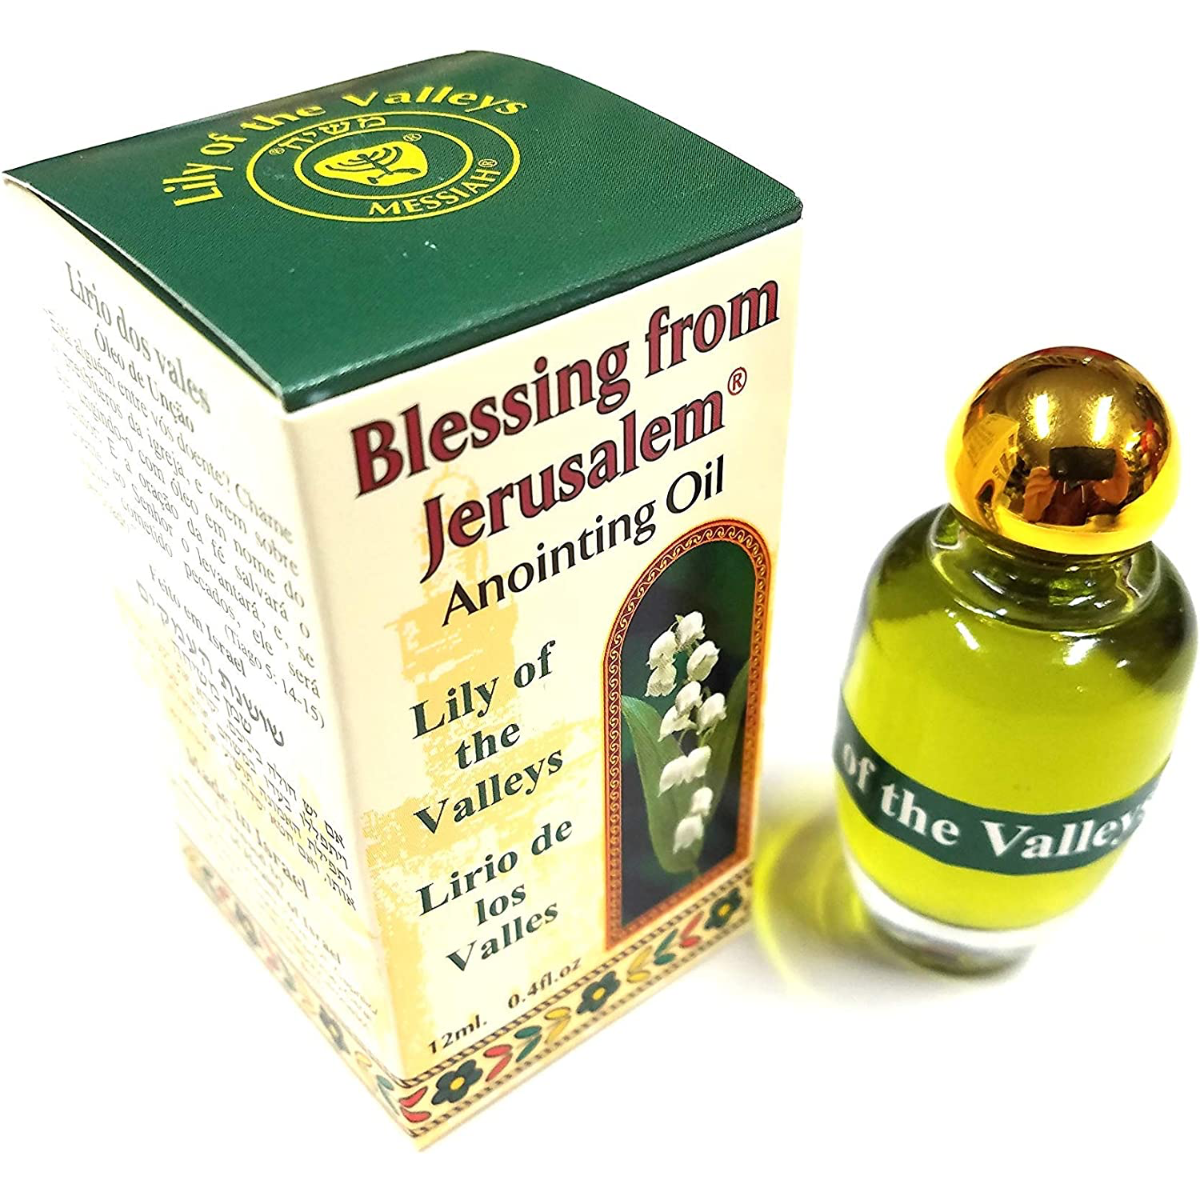 Lily of the Valleys Anointing Oil From Jerusalem 12 ml - 0.4 fl.oz.